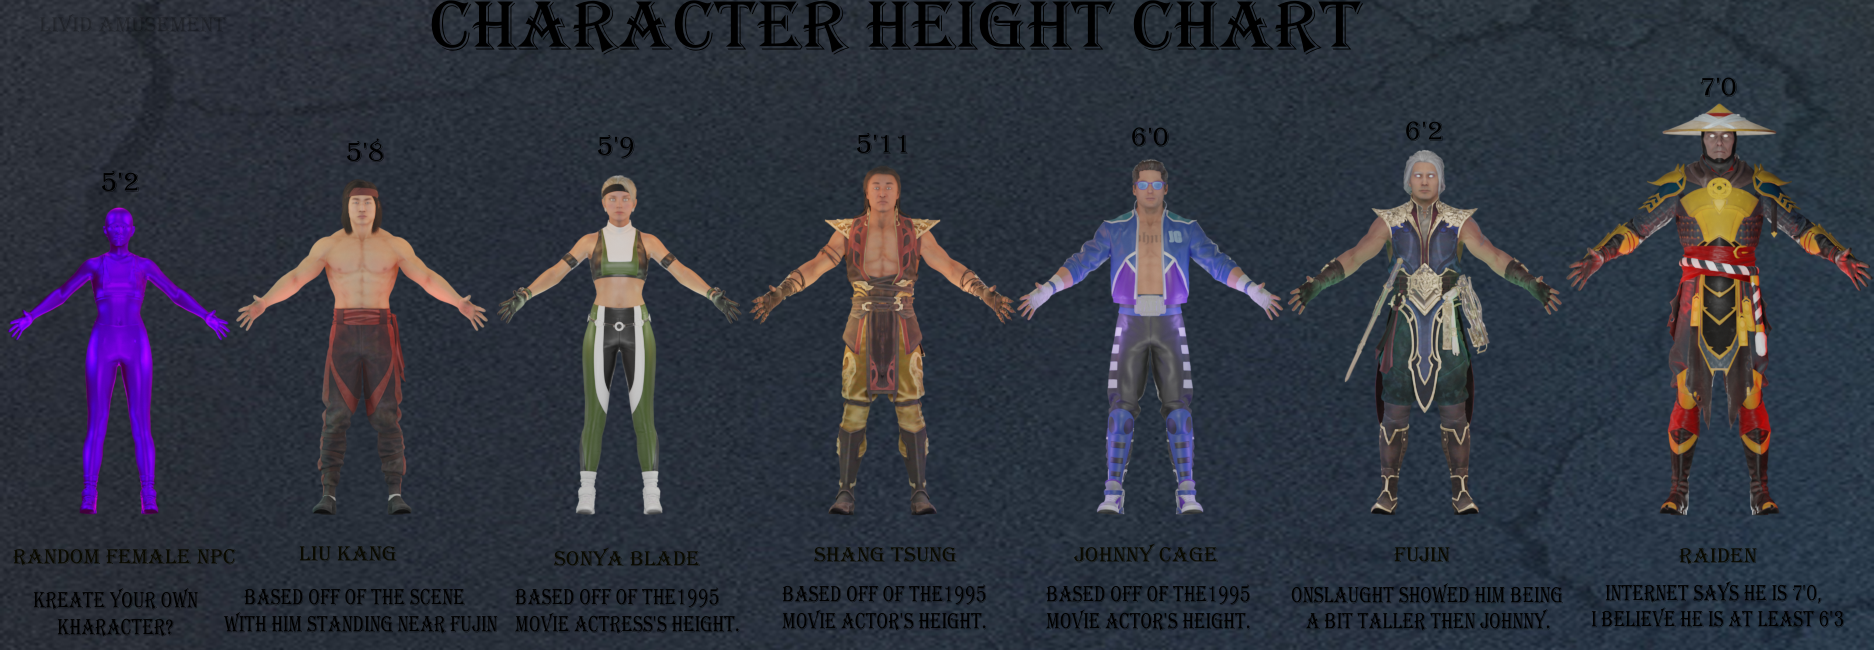 MK: Character Height Chart #4 (Special Forces) by LividAmusement